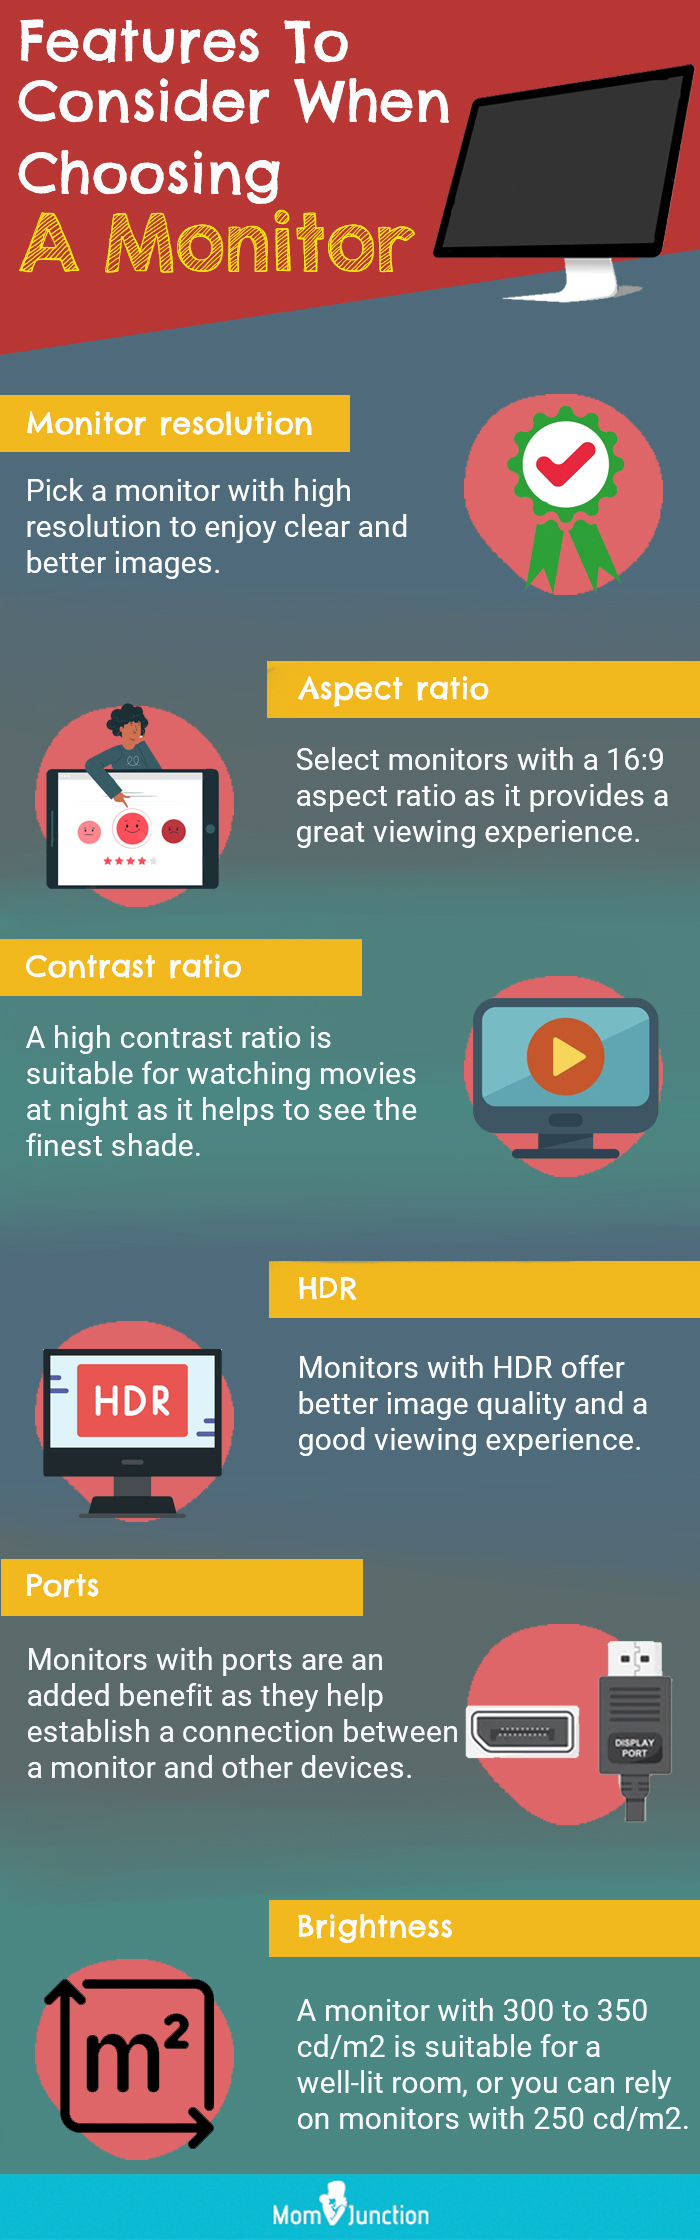 Features To Consider When Choosing A Monitor (Infographic)